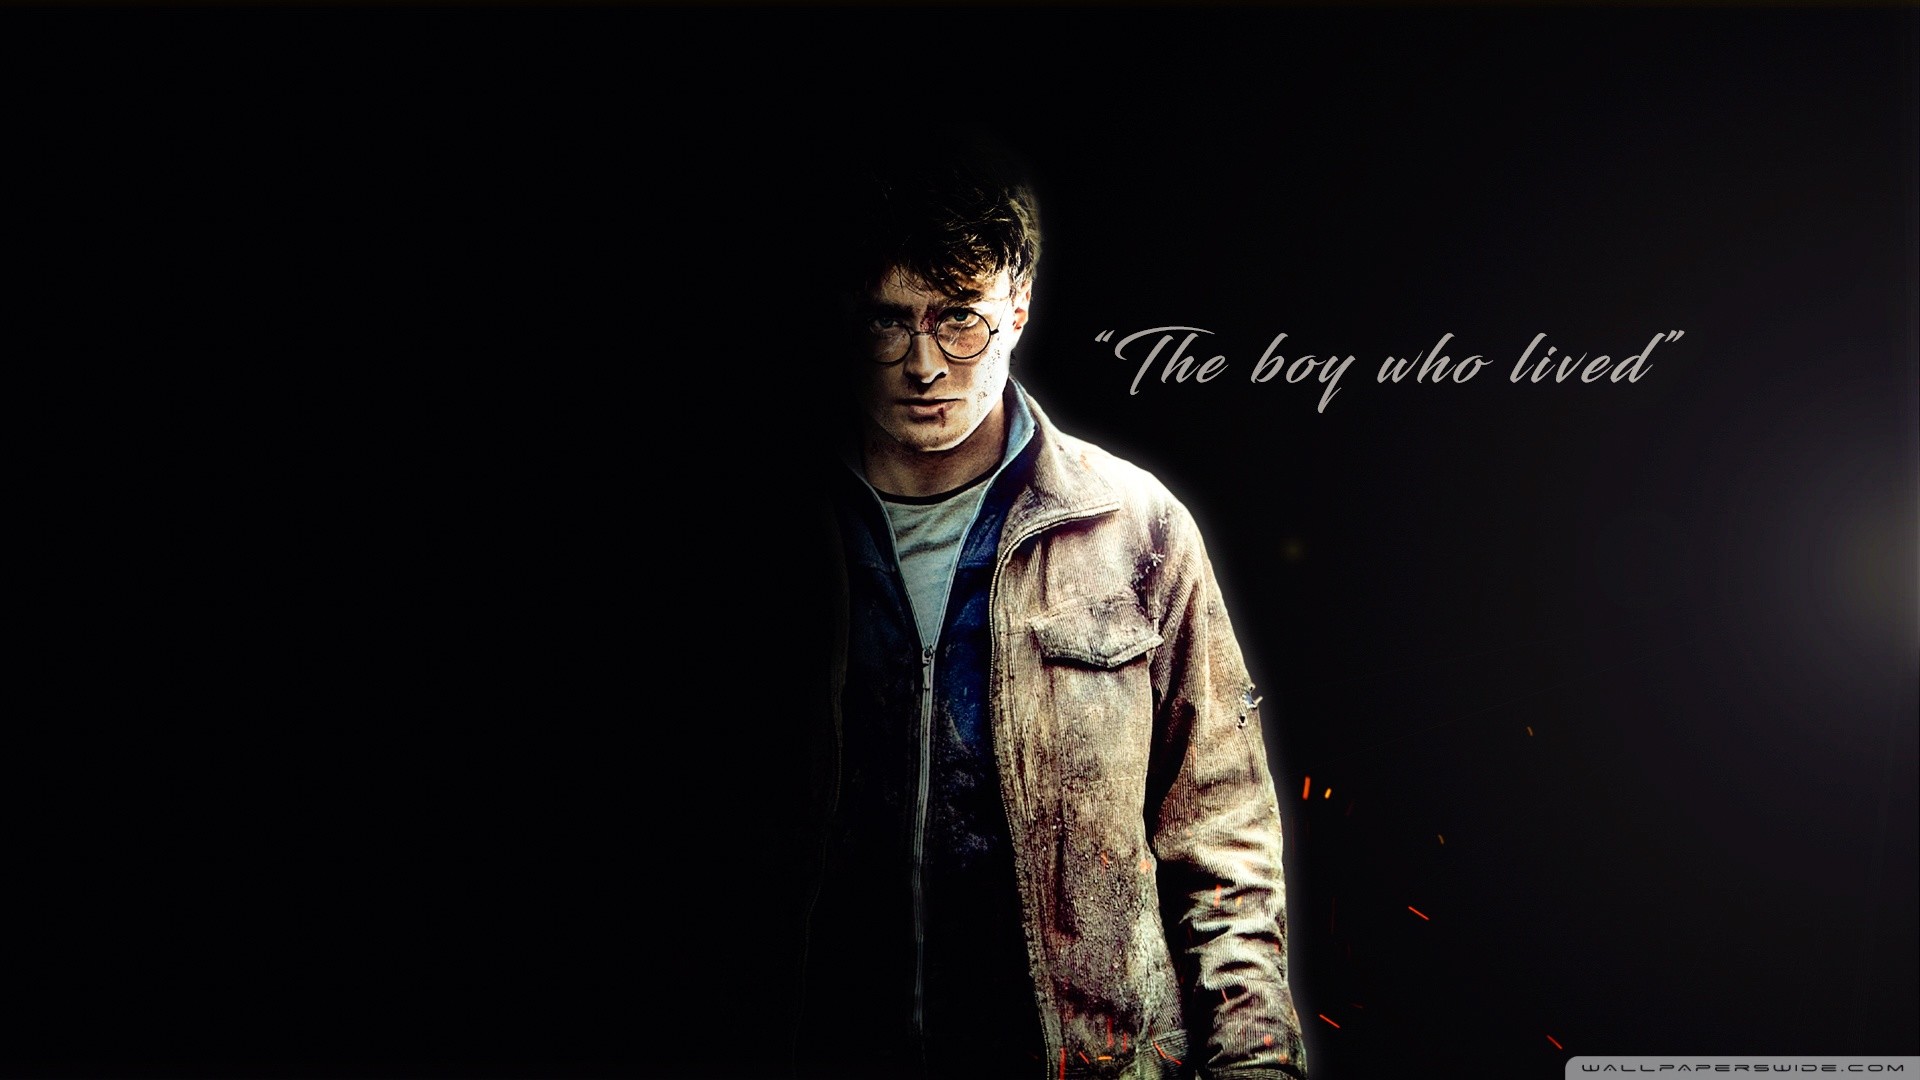 Harry Potter Desktop Wallpaper : Harry Potter 7 Wallpapers | Beautiful Cool Wallpapers - Find over 100+ of the best free harry potter images.